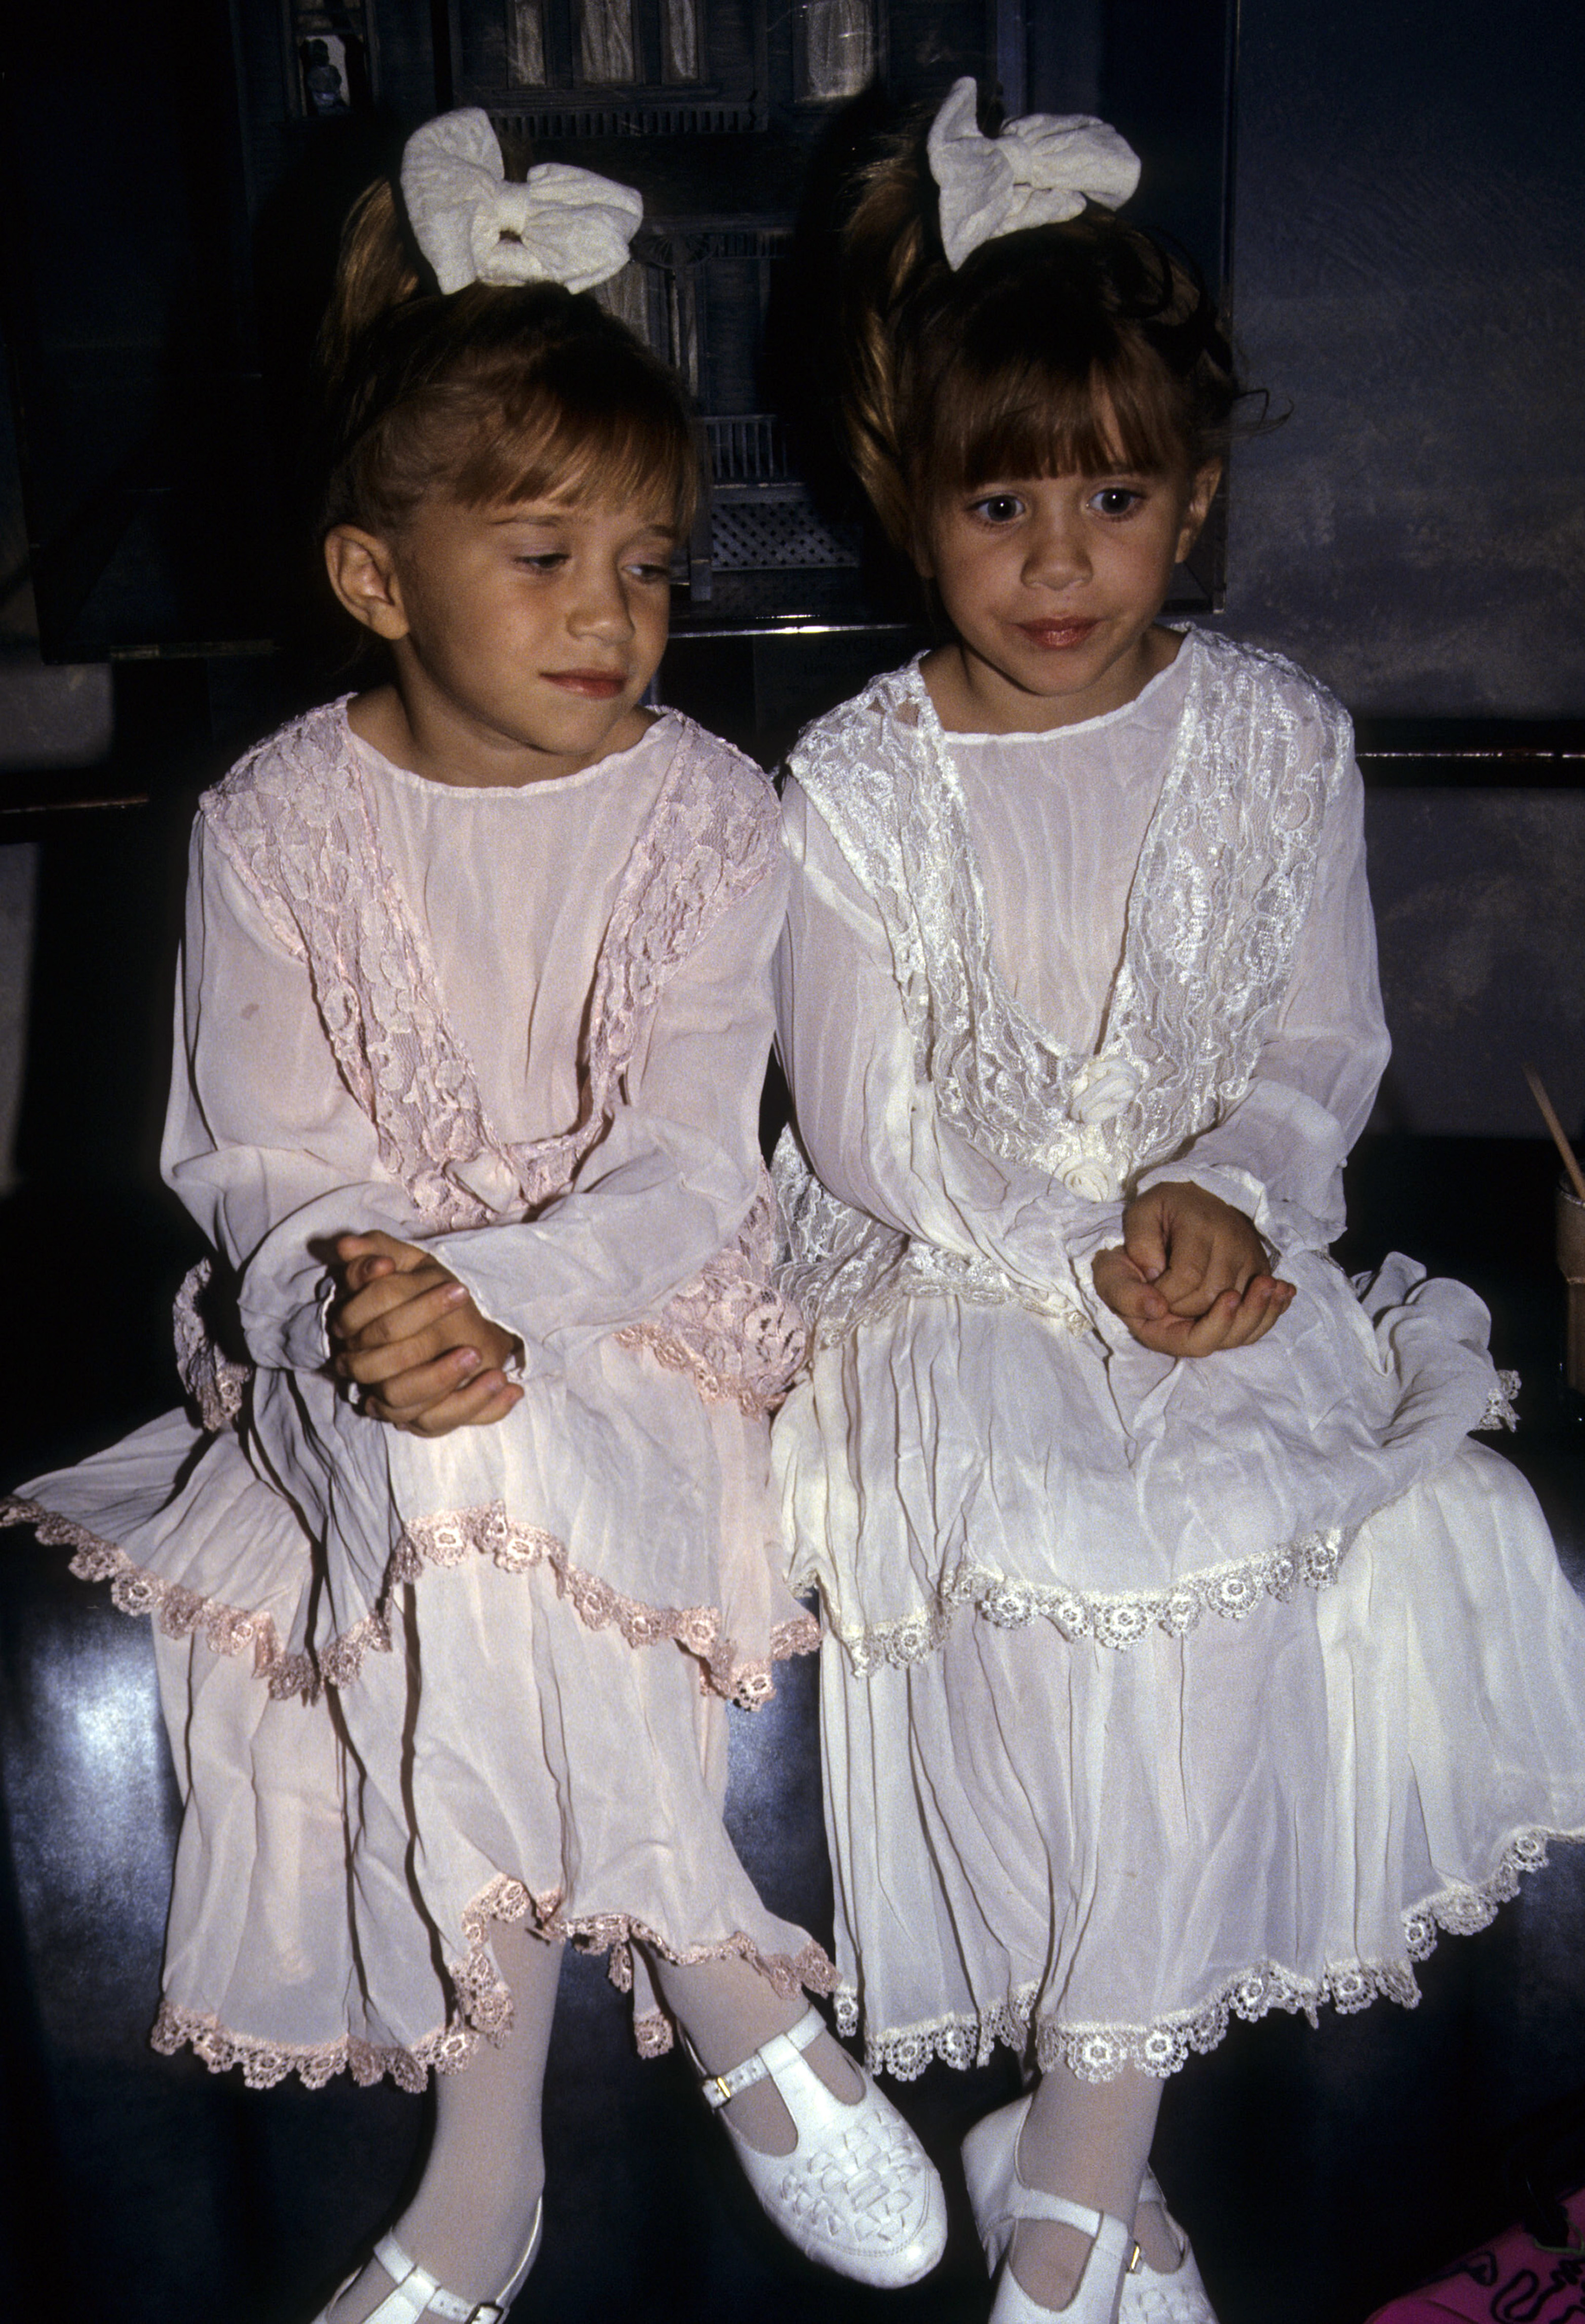 The Olsen twins, Mary-Kate and Ashley Olsen at Planet Hollywood in New York on October 5, 1993. | Source: Getty Images